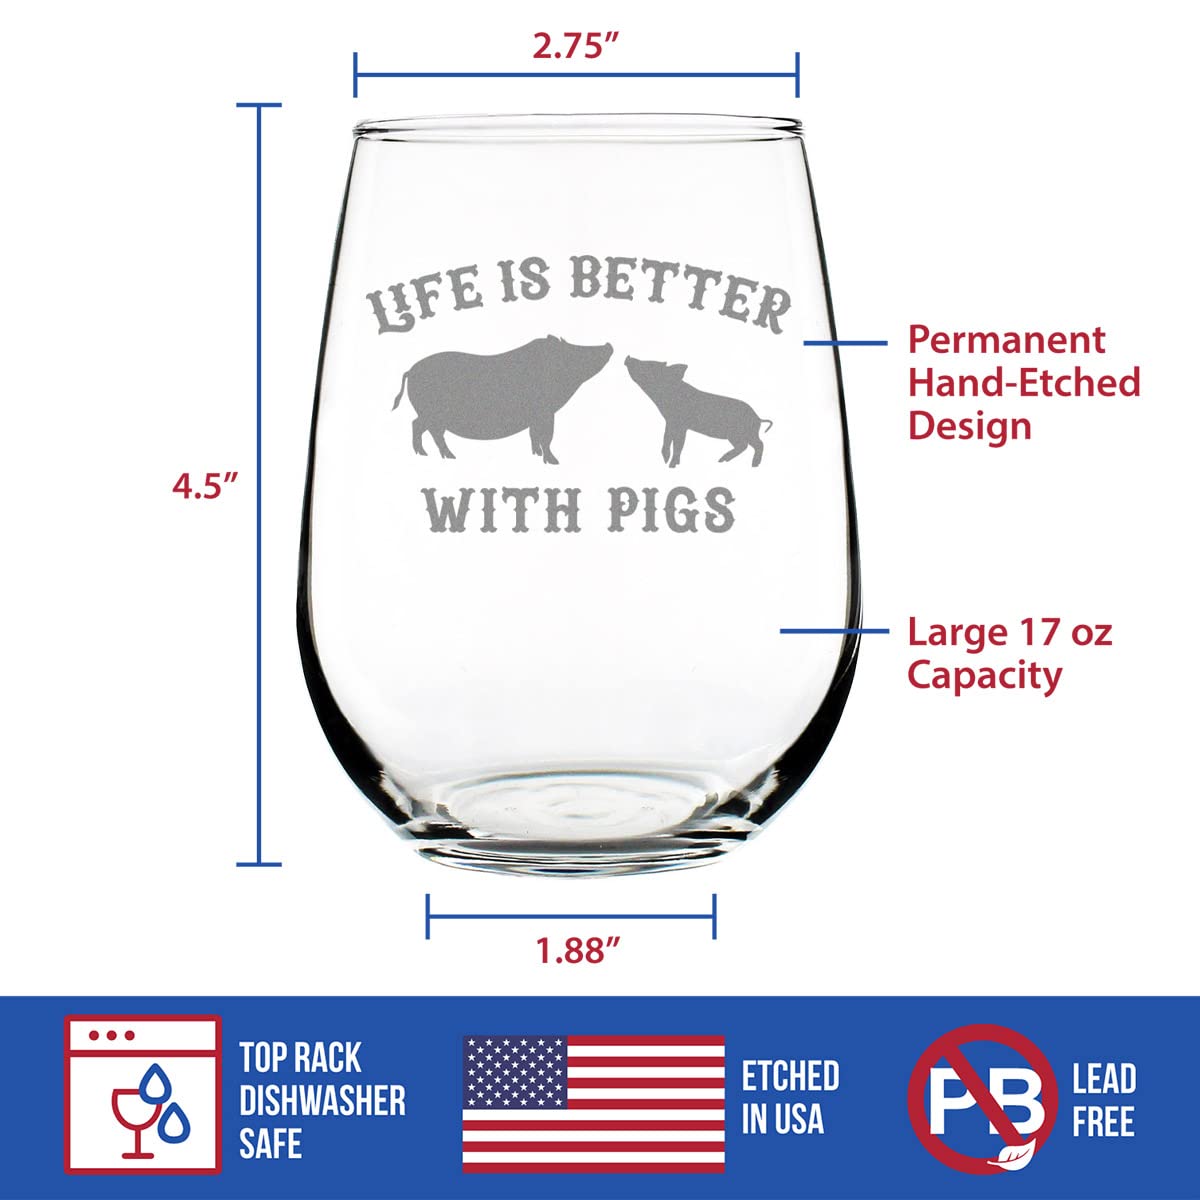 Life Is Better With Pigs - Stemless Wine Glass - Funny Pig Gifts and Decor for Men & Women - Large 17 oz Glasses